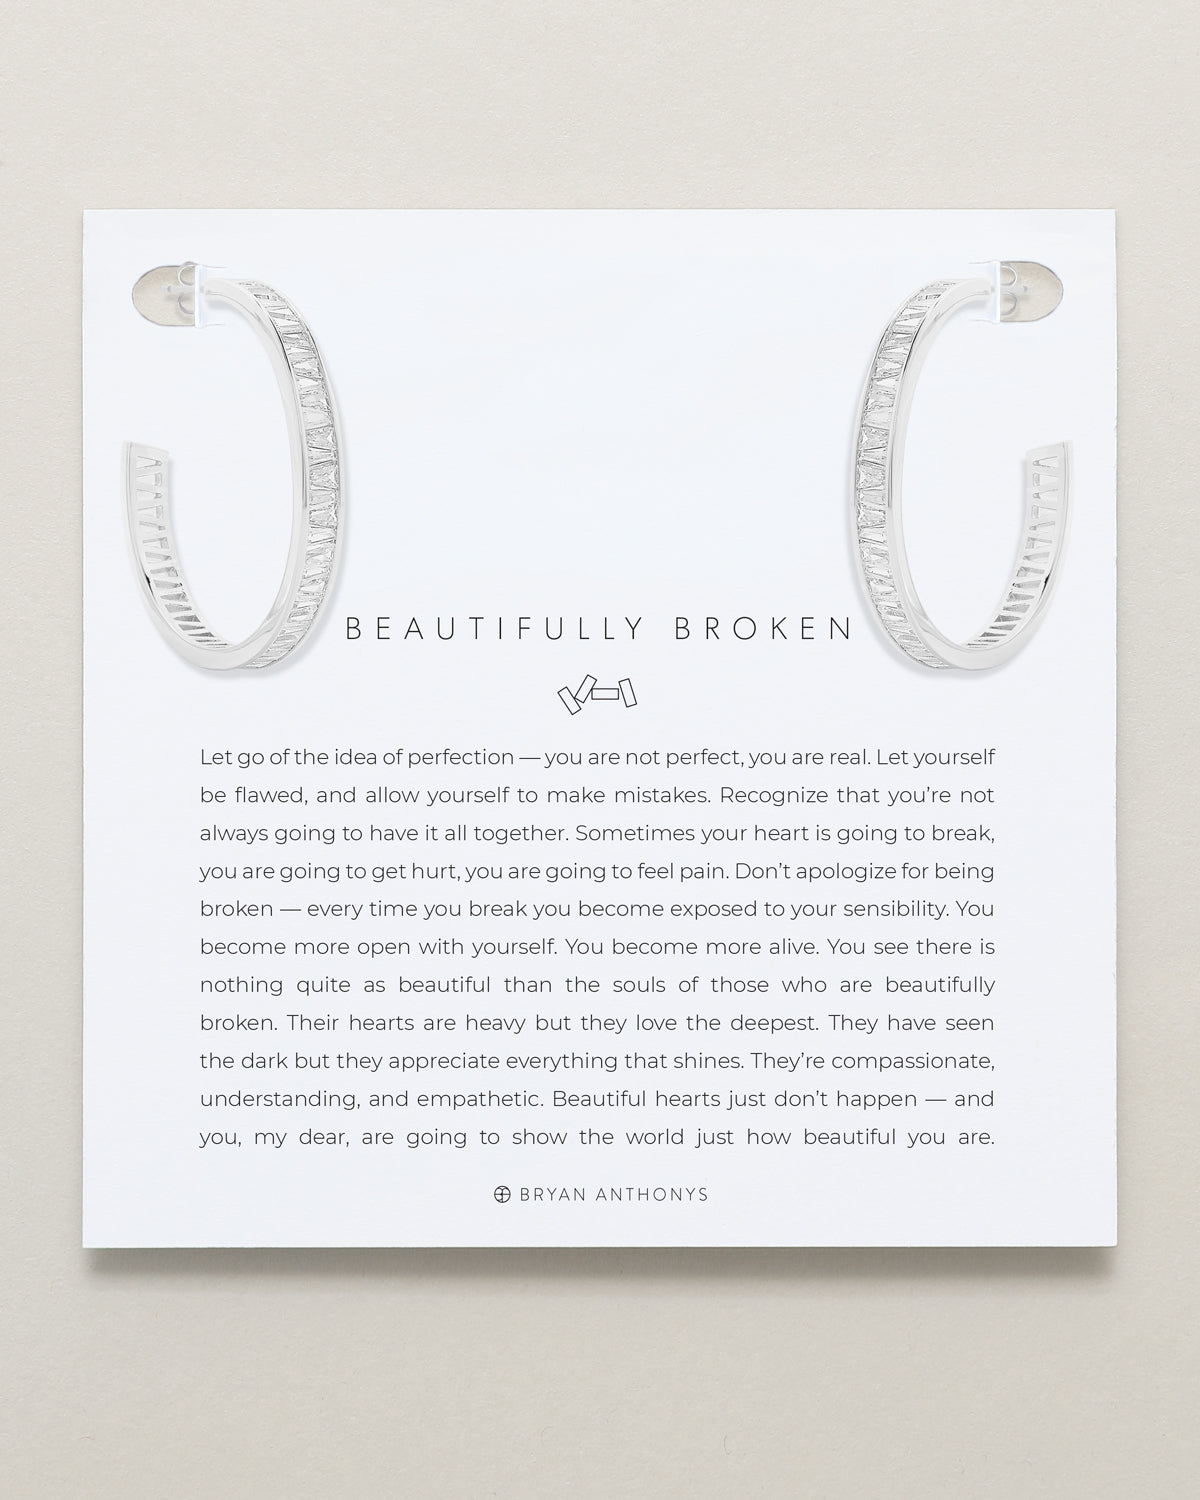 Bryan Anthonys Beautifully Broken Collection Baguette Maxi Hoop Earrings Silver On Card